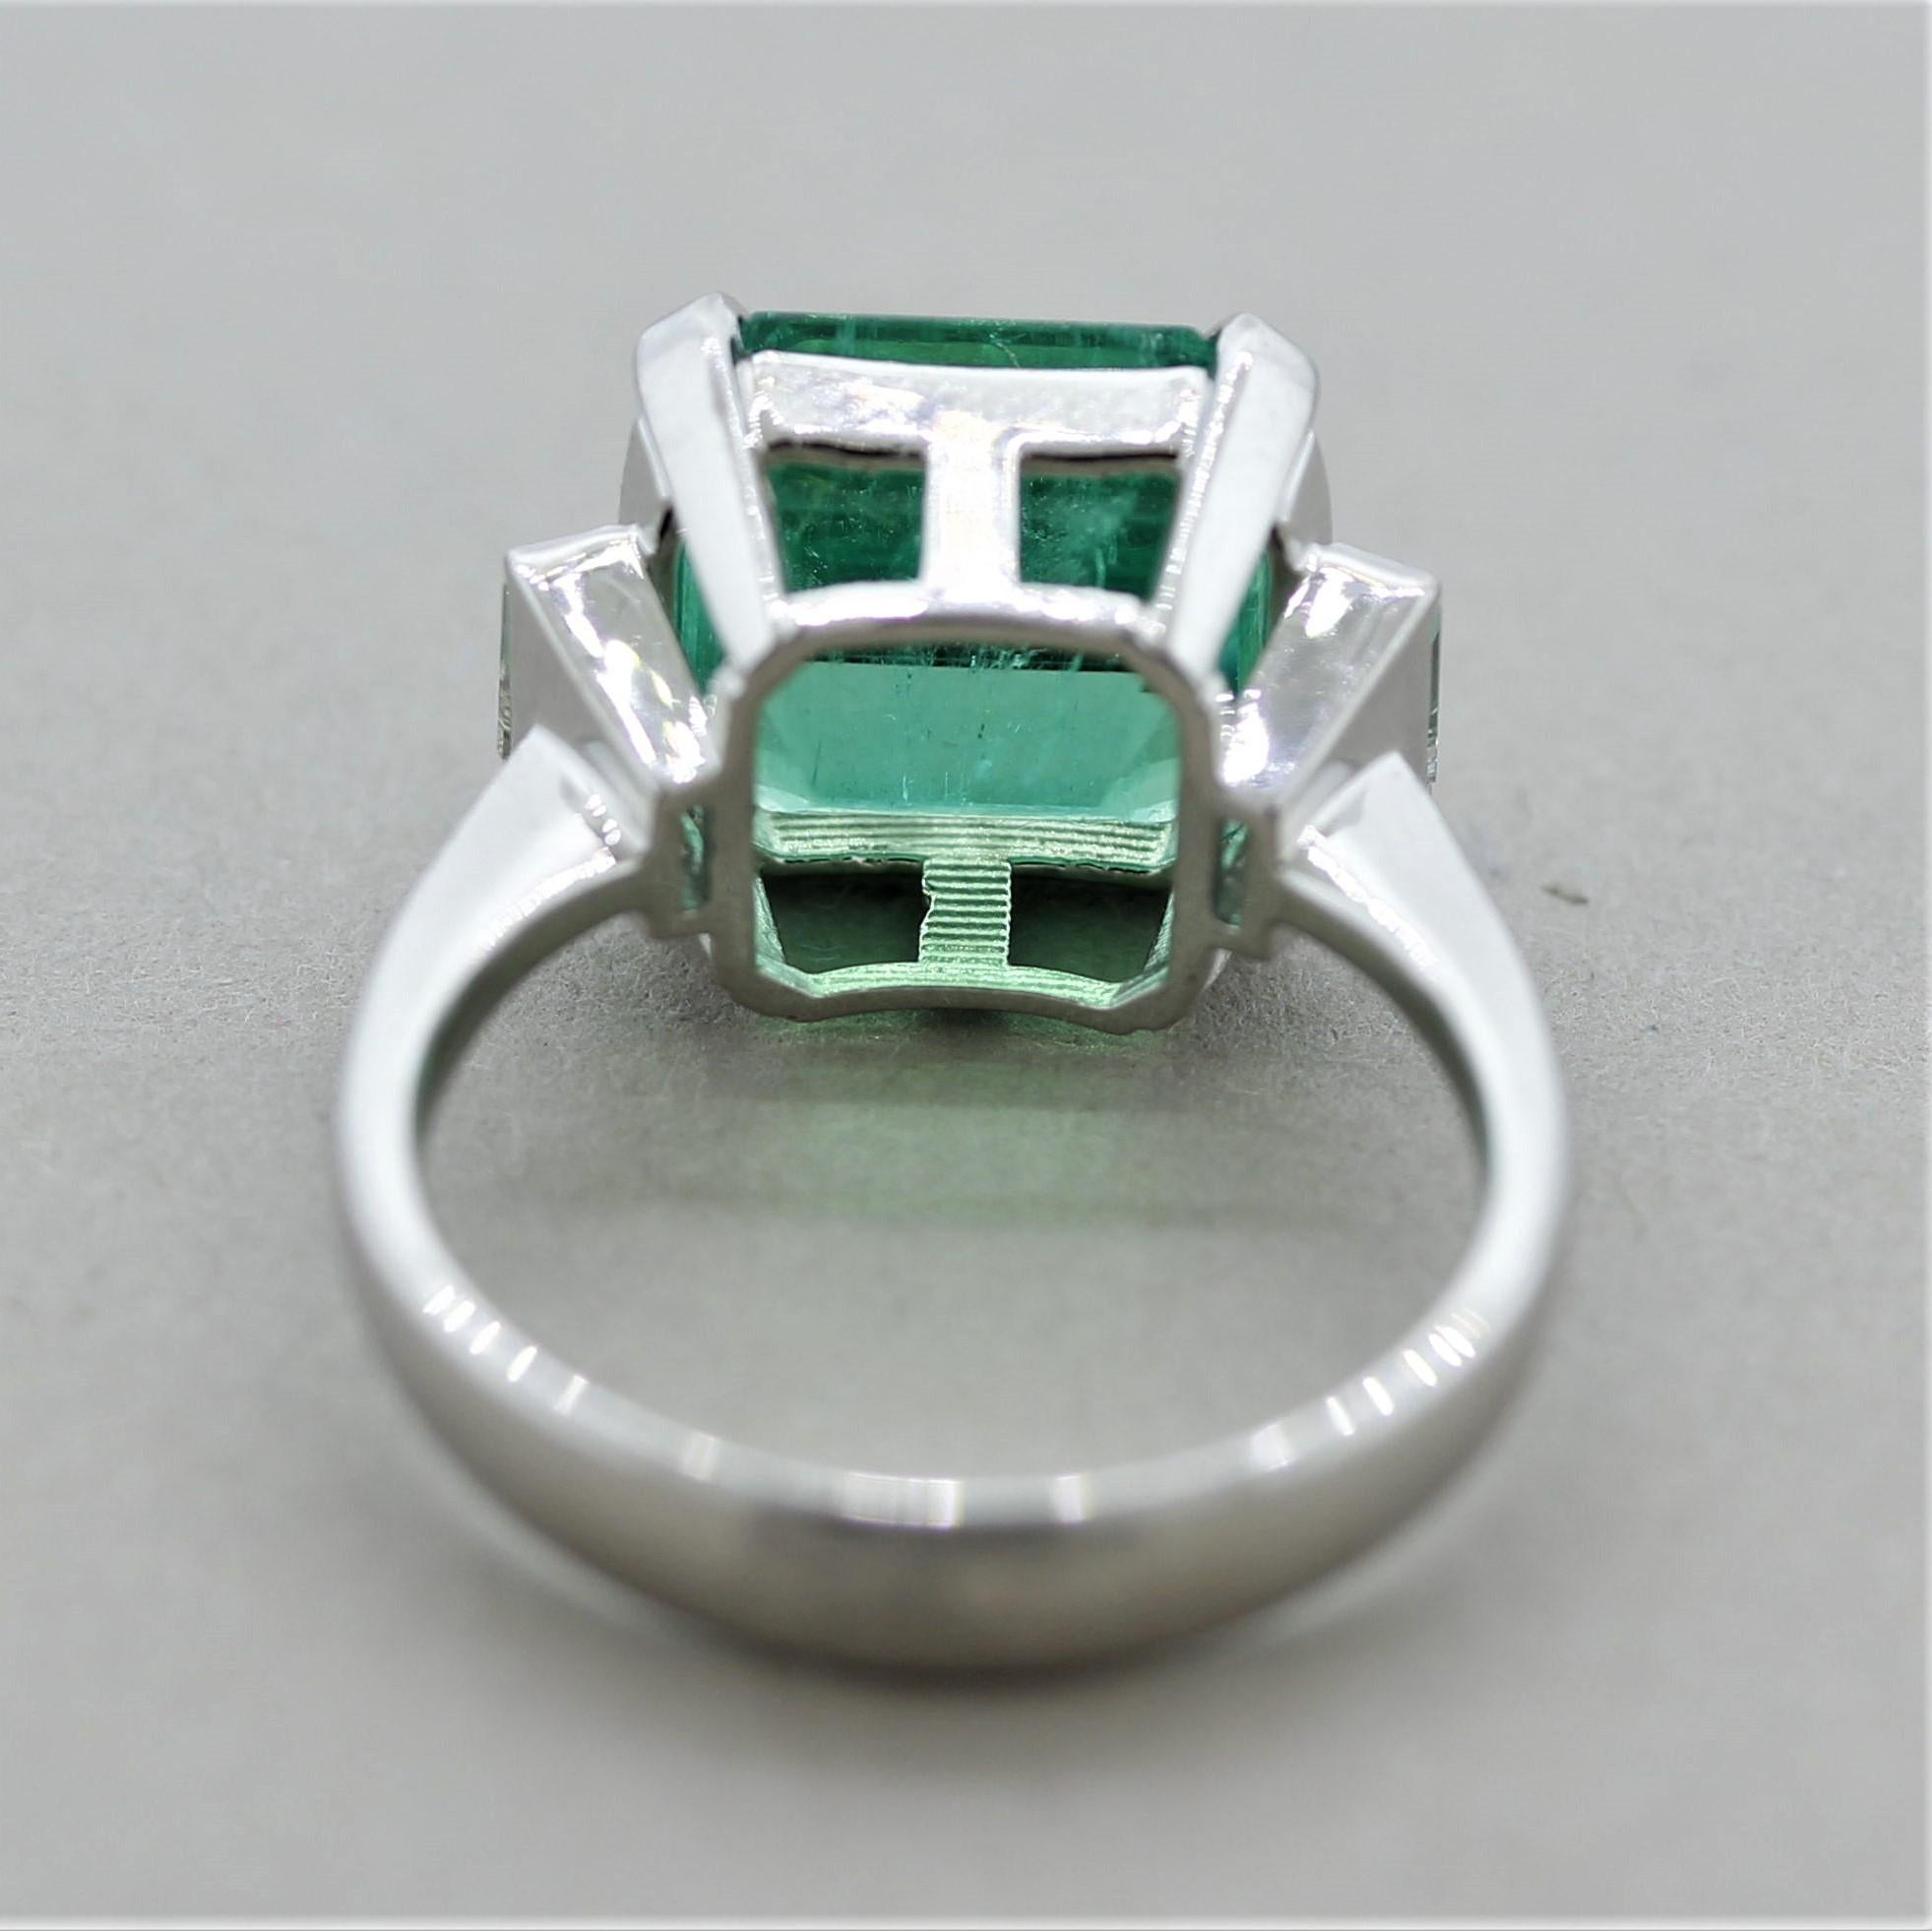 5.43 Carat Colombian Emerald Diamond Platinum Ring, GIA Certified For Sale 1